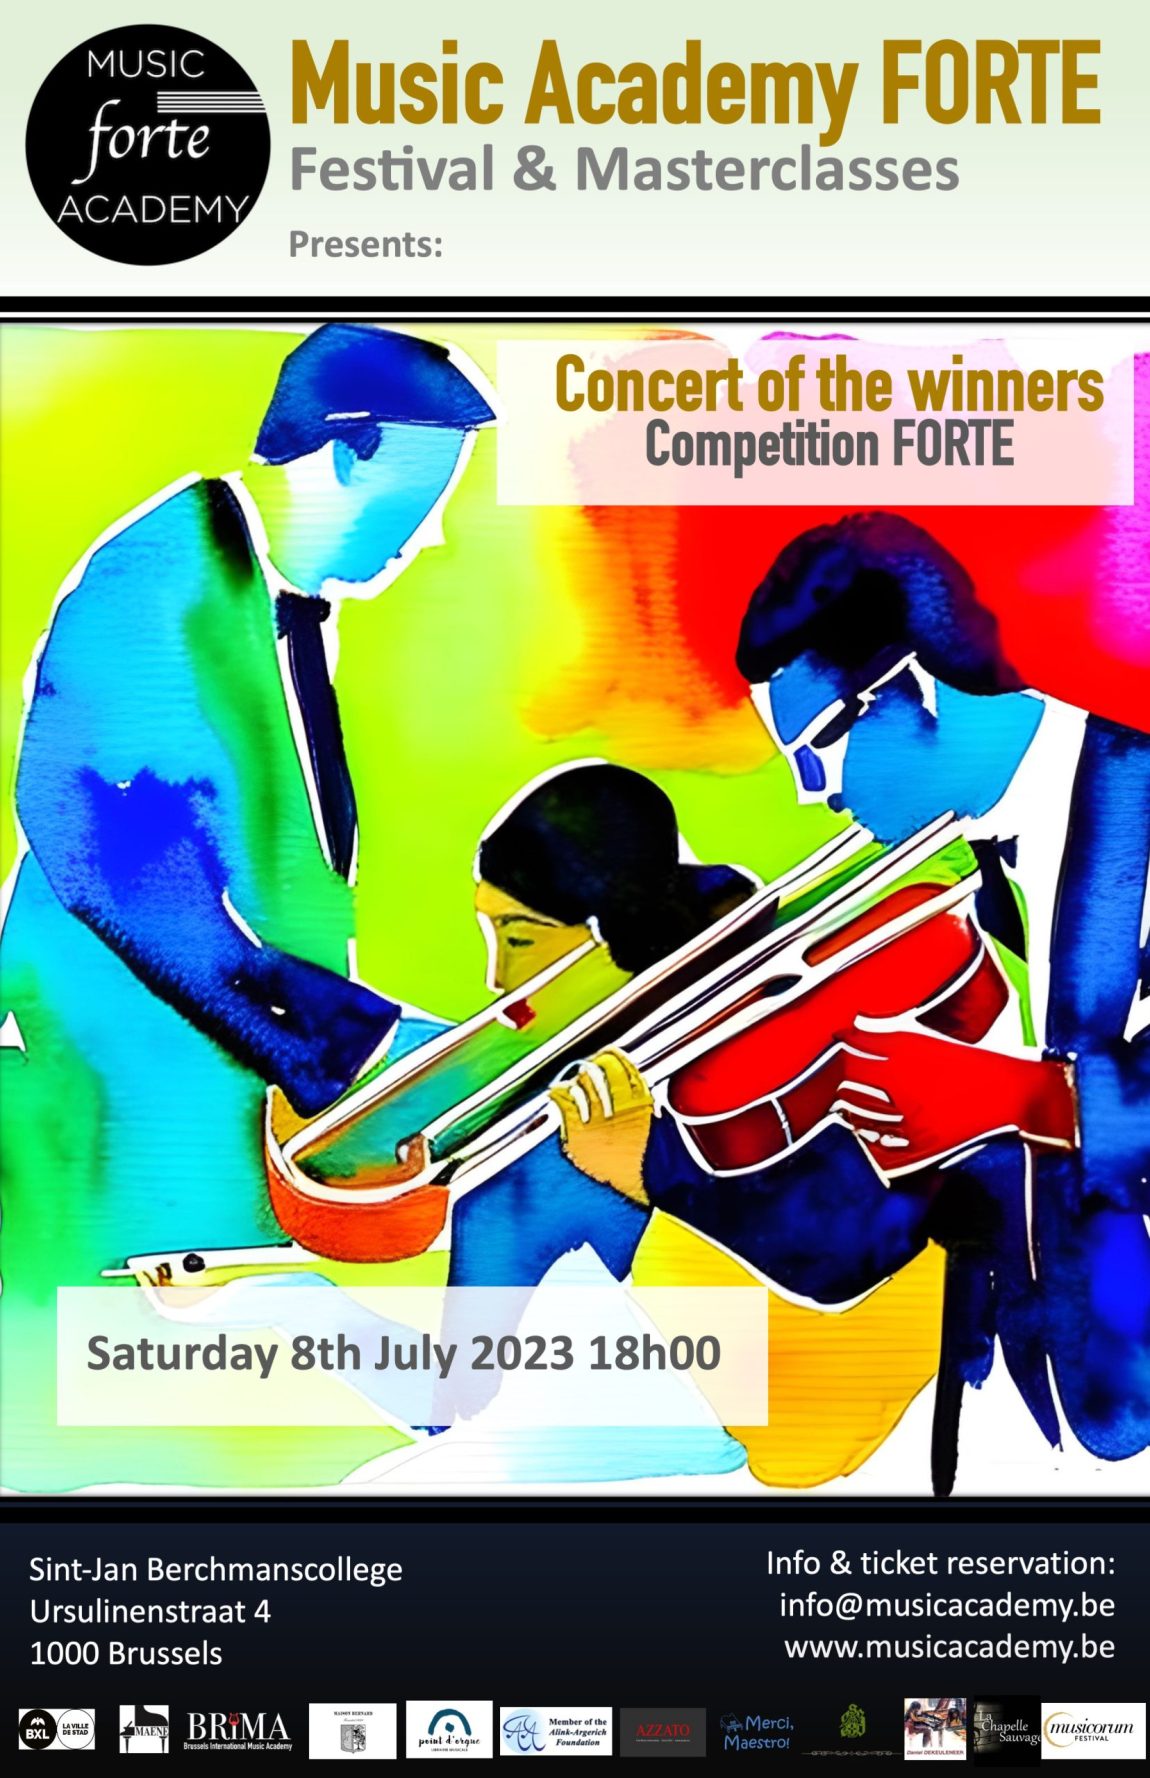 Concert of the winners Competition FORTE